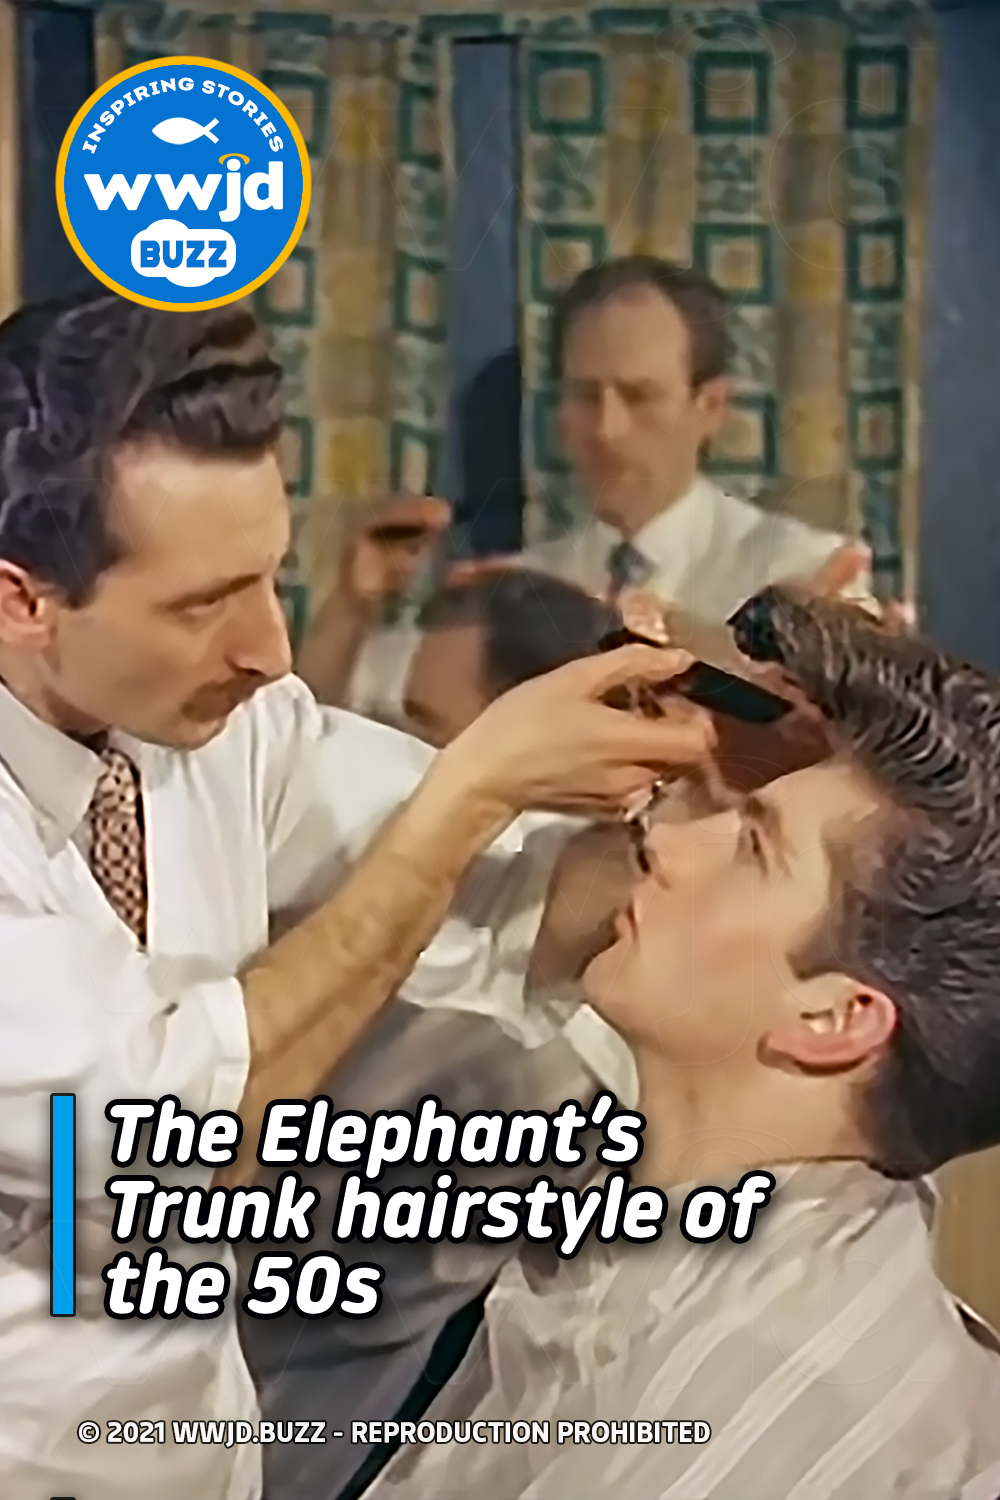 The Elephant’s Trunk hairstyle of the 50s